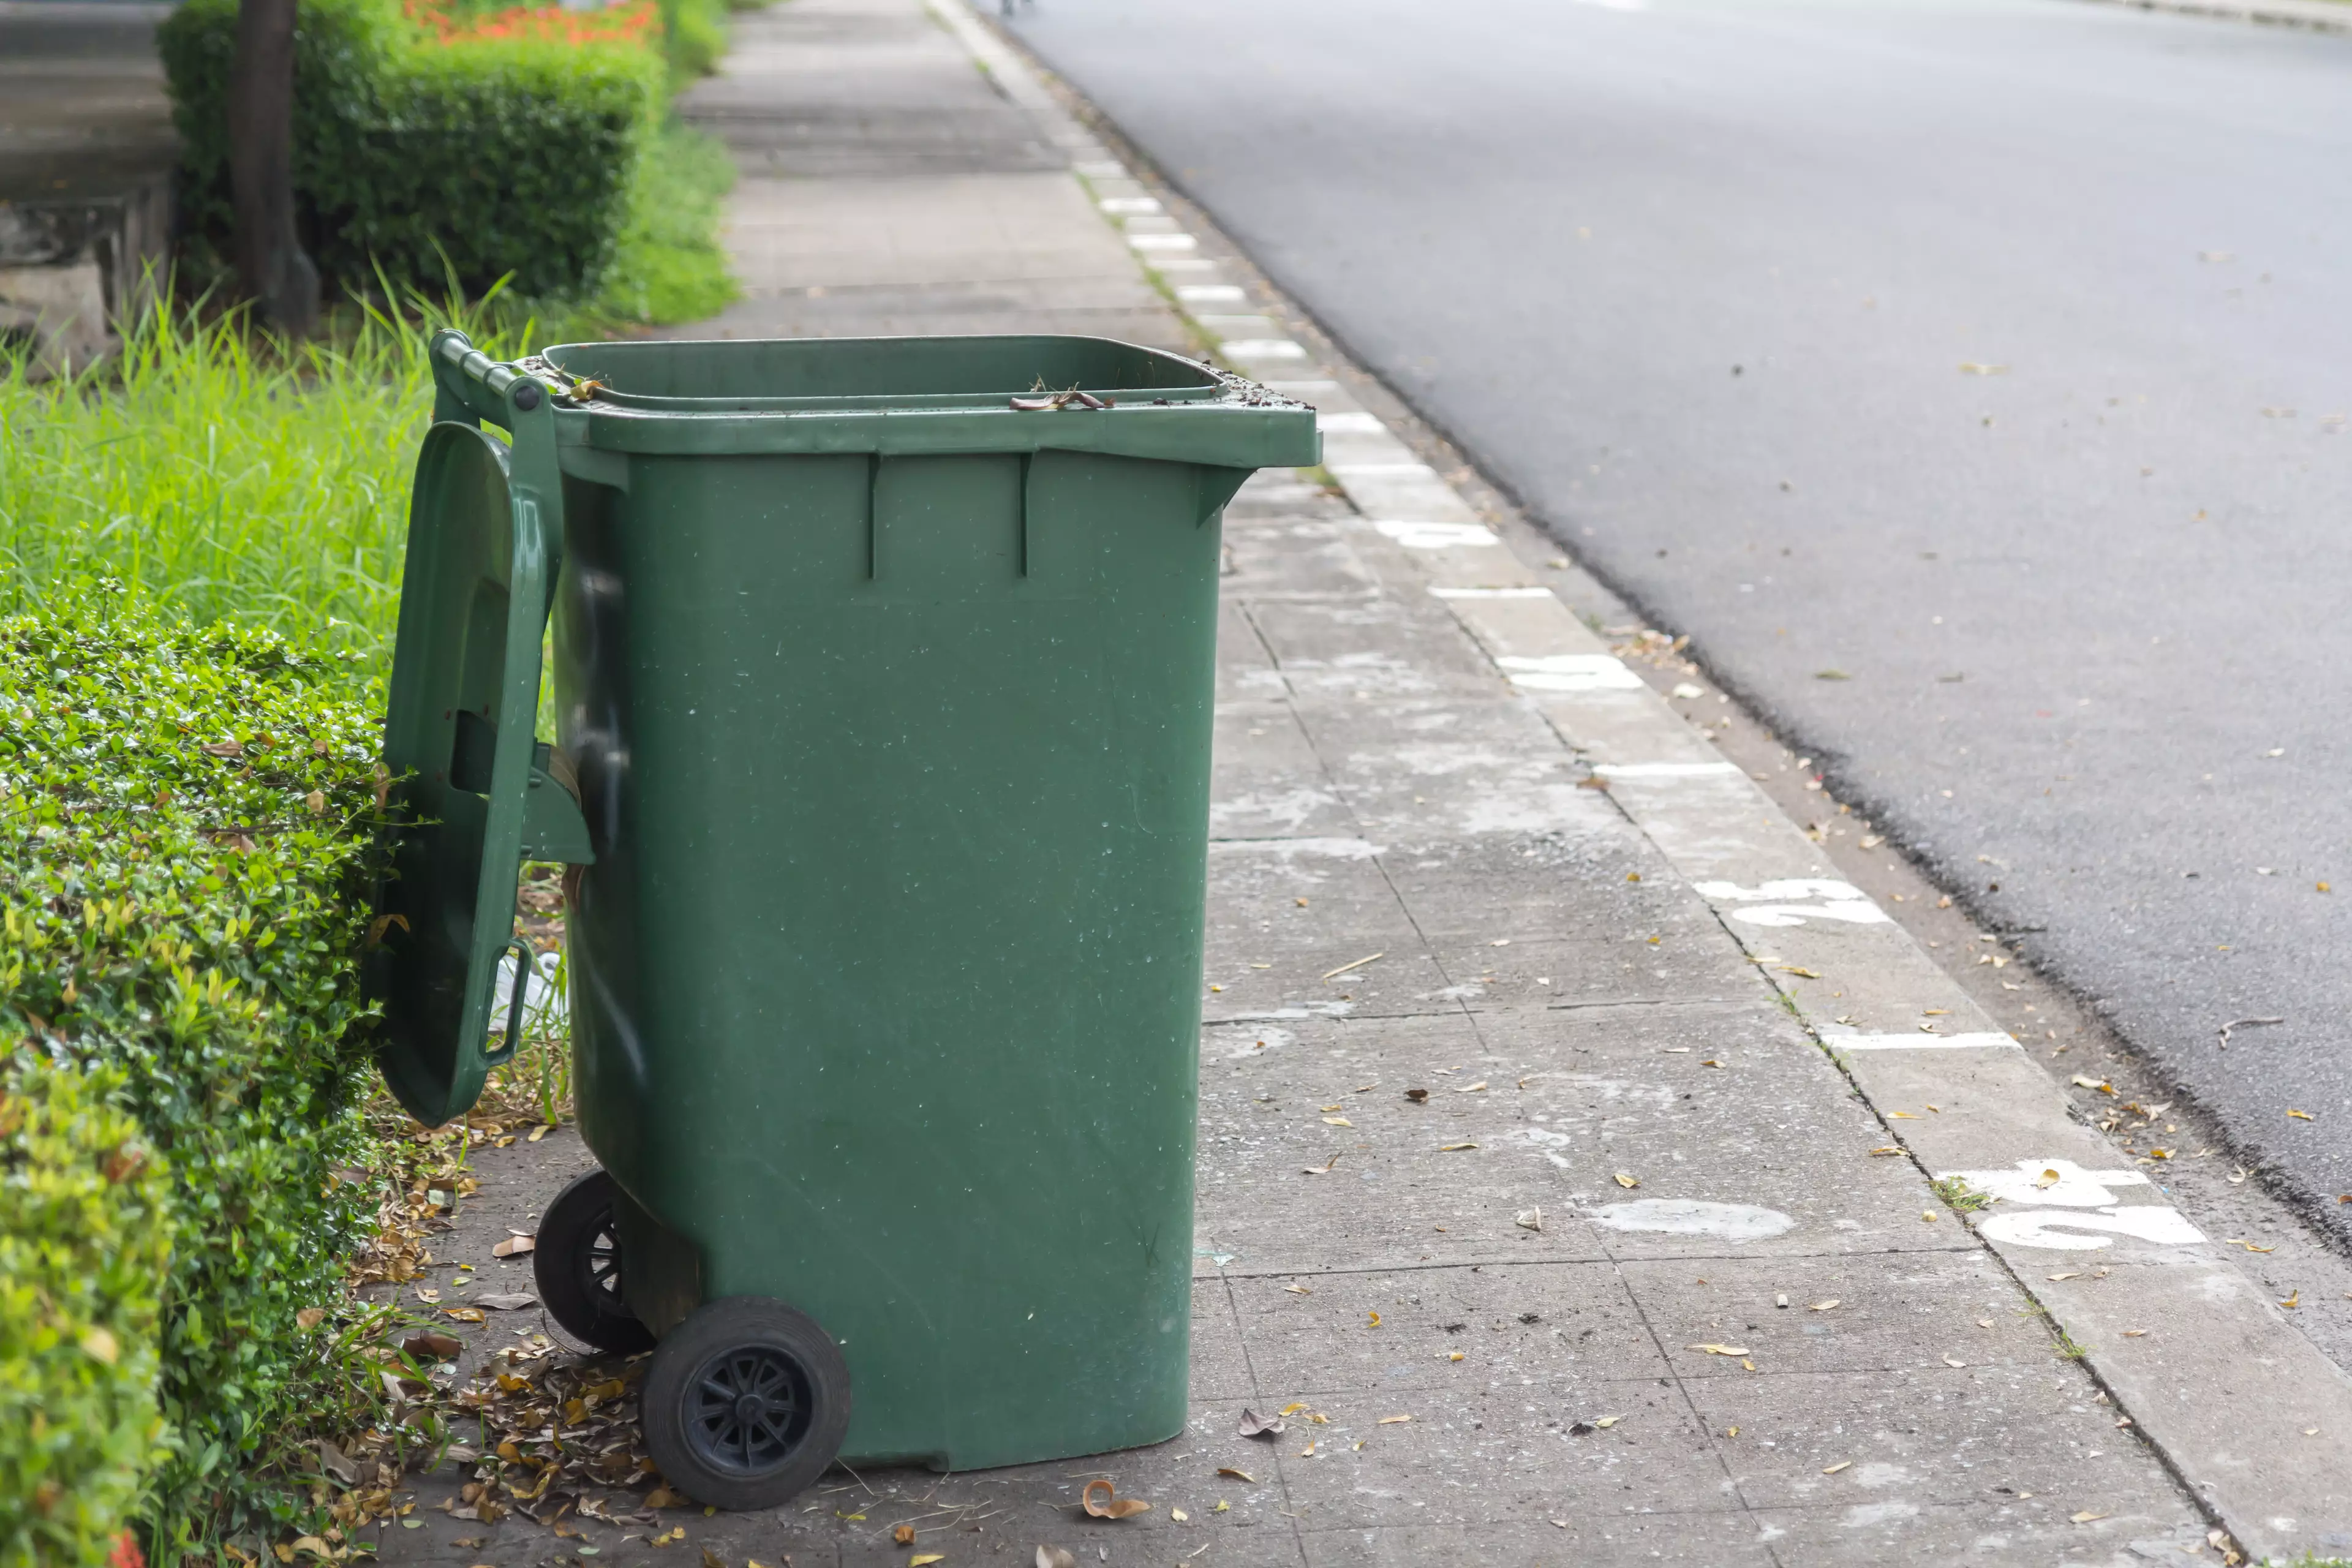 Becoming obsessed with bin day also means you're 'past it' (